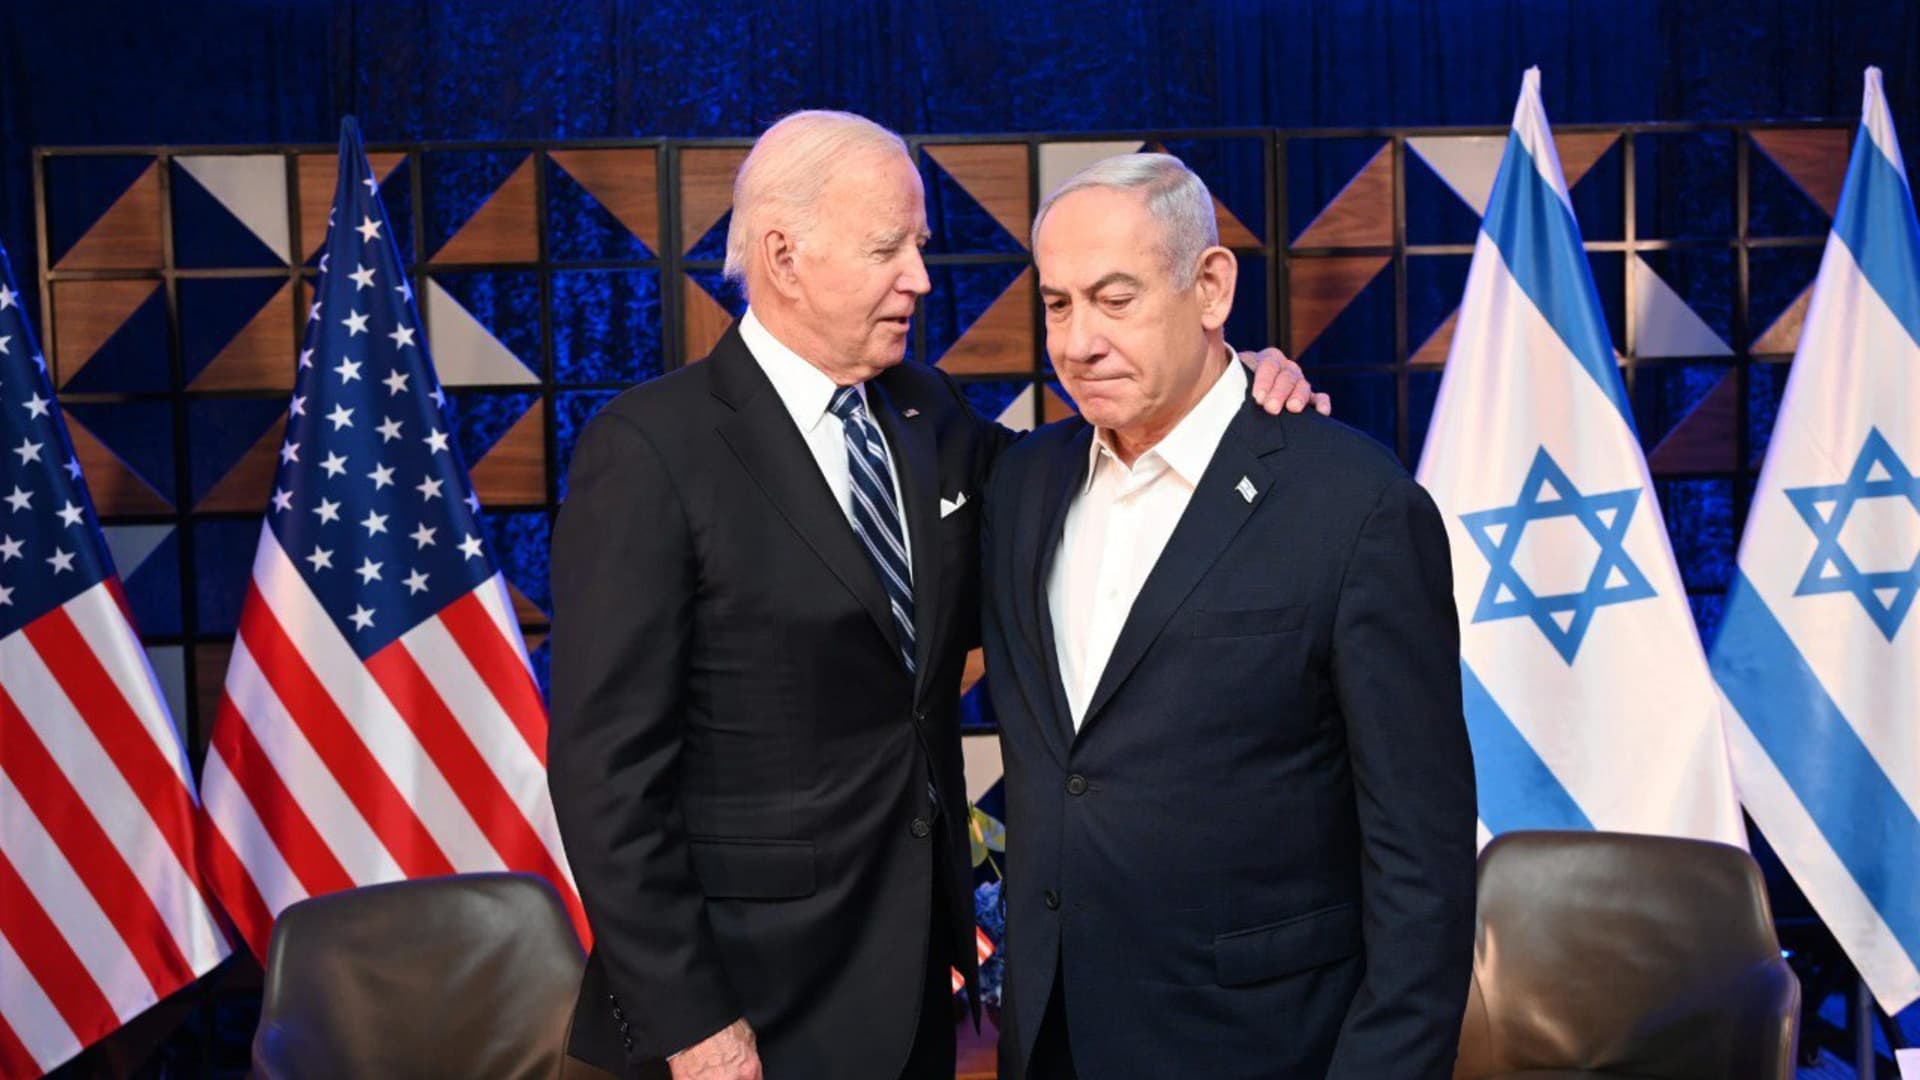 Biden's support of Israel leaves him as isolated as Russia on the world stage, analyst says